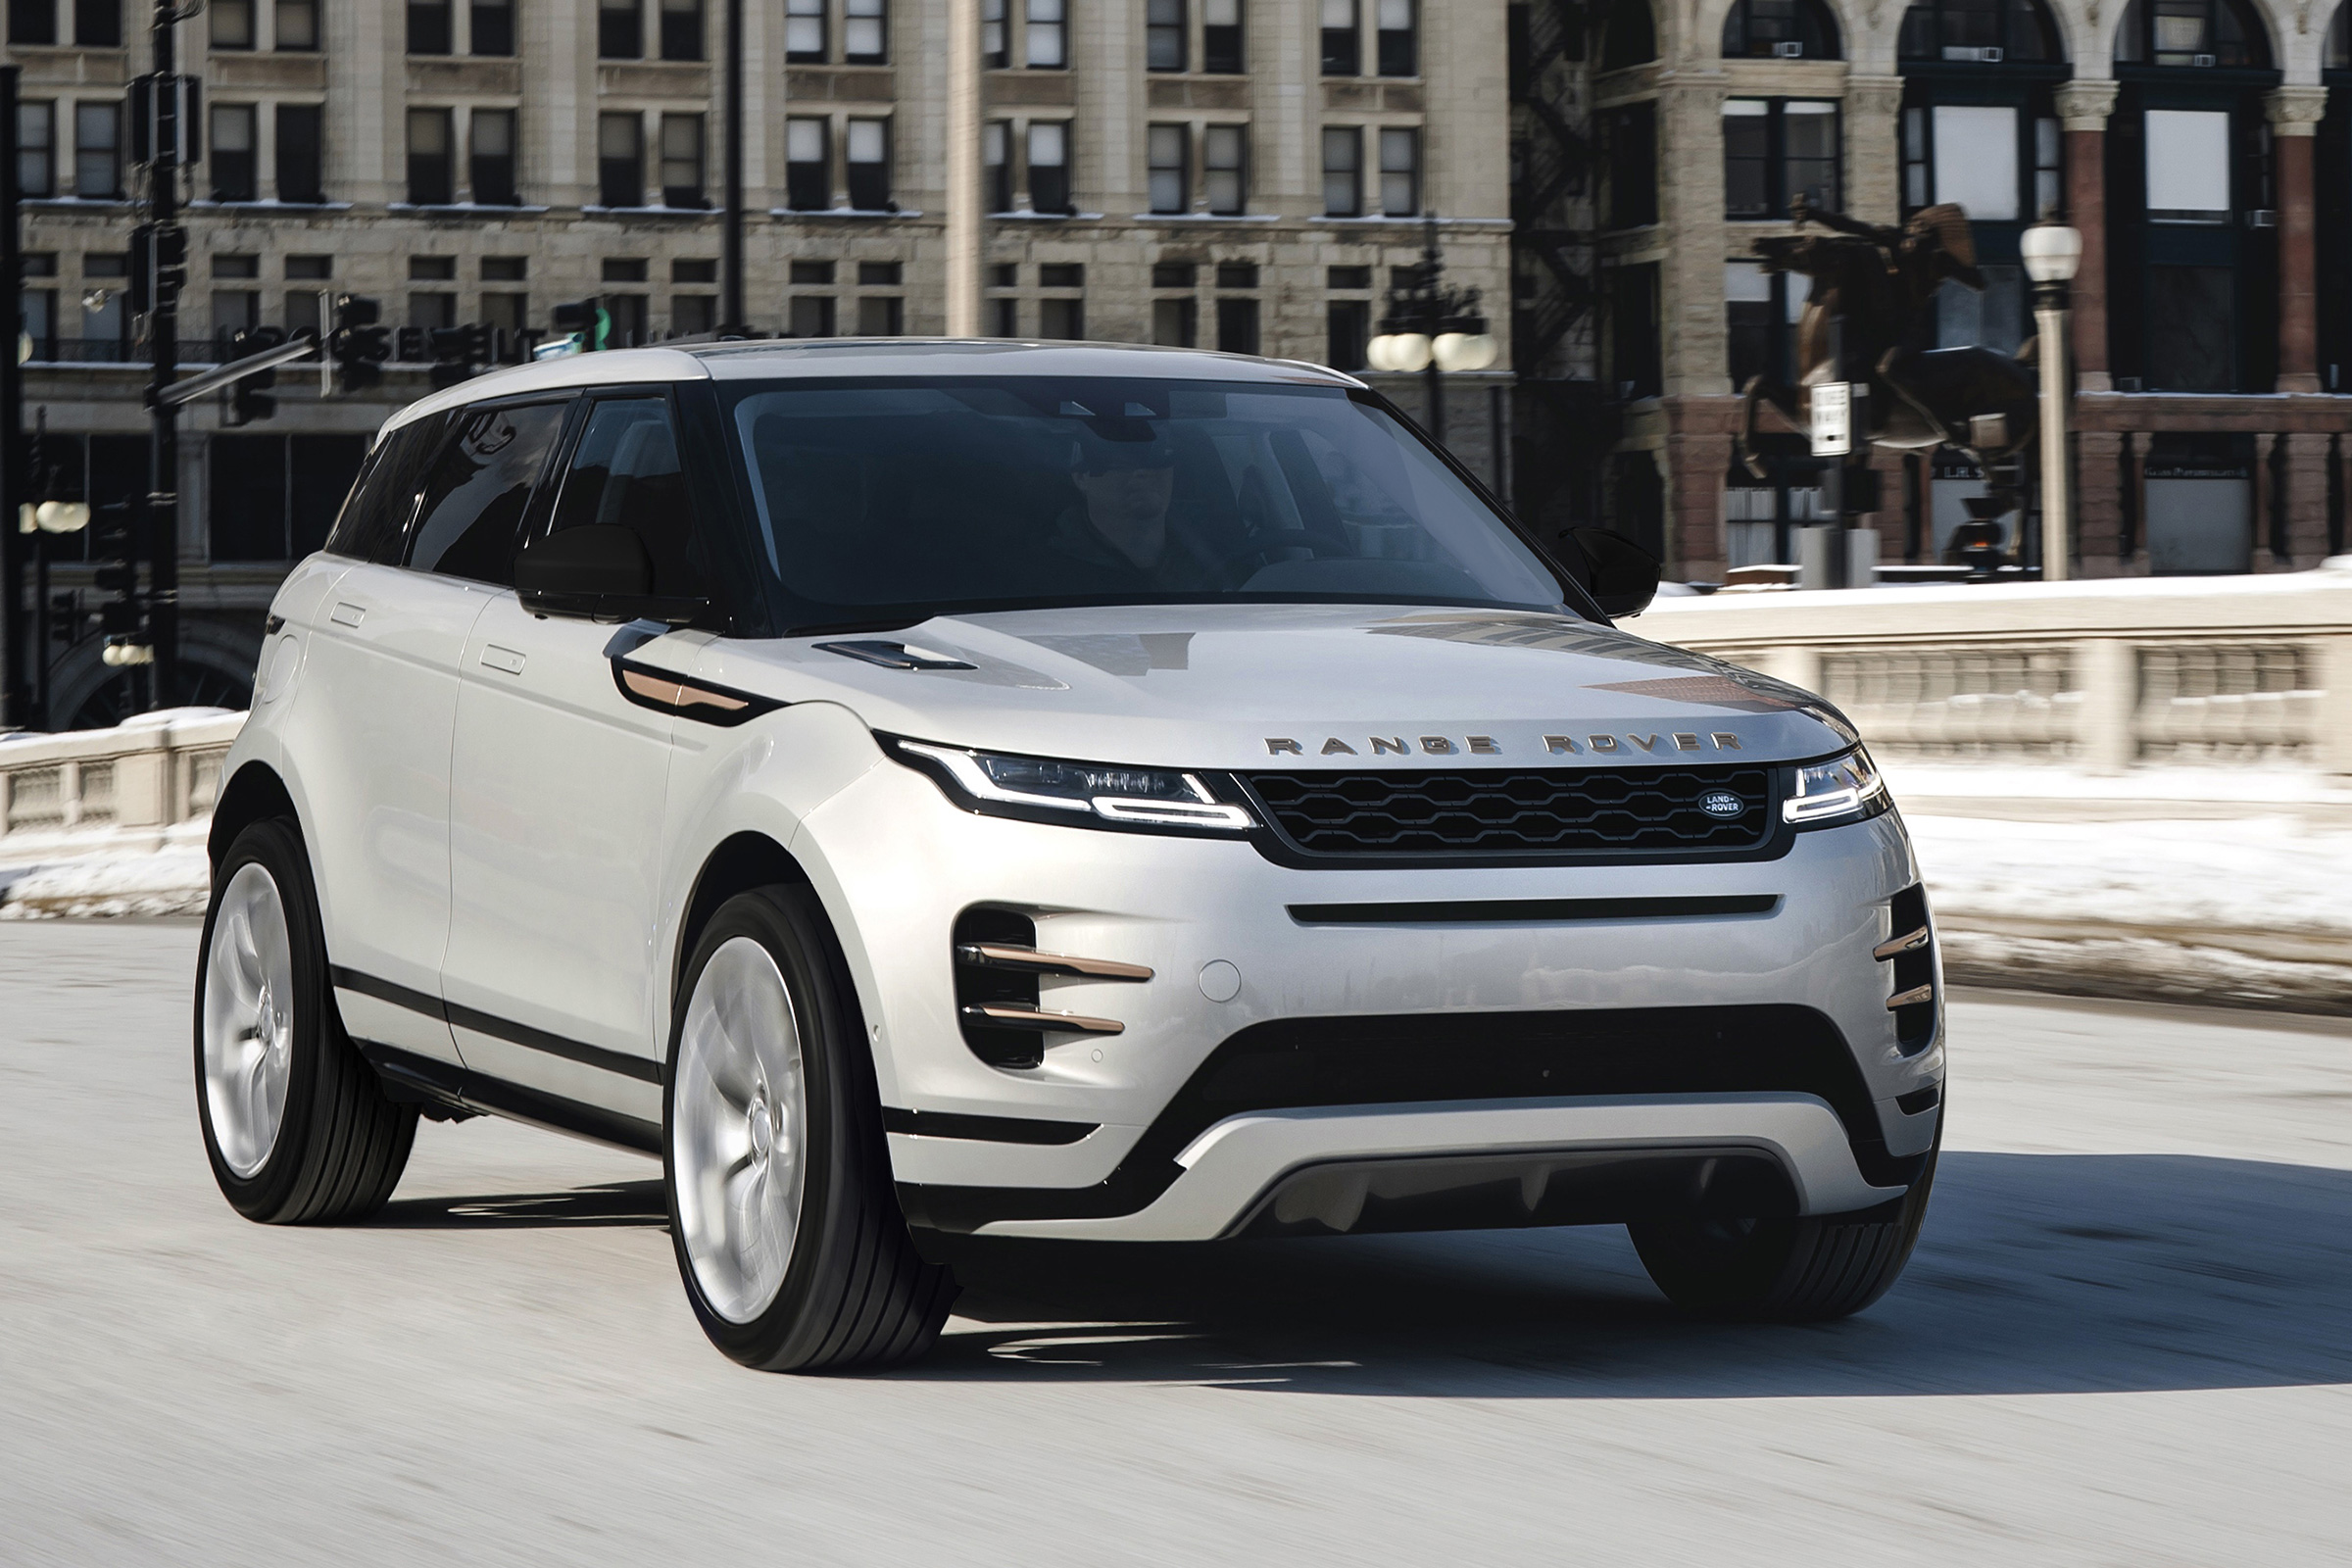 Sometimes finding garage sales is tricky, though. Range Rover Evoque P300e plug-in hybrid: prices, specs and